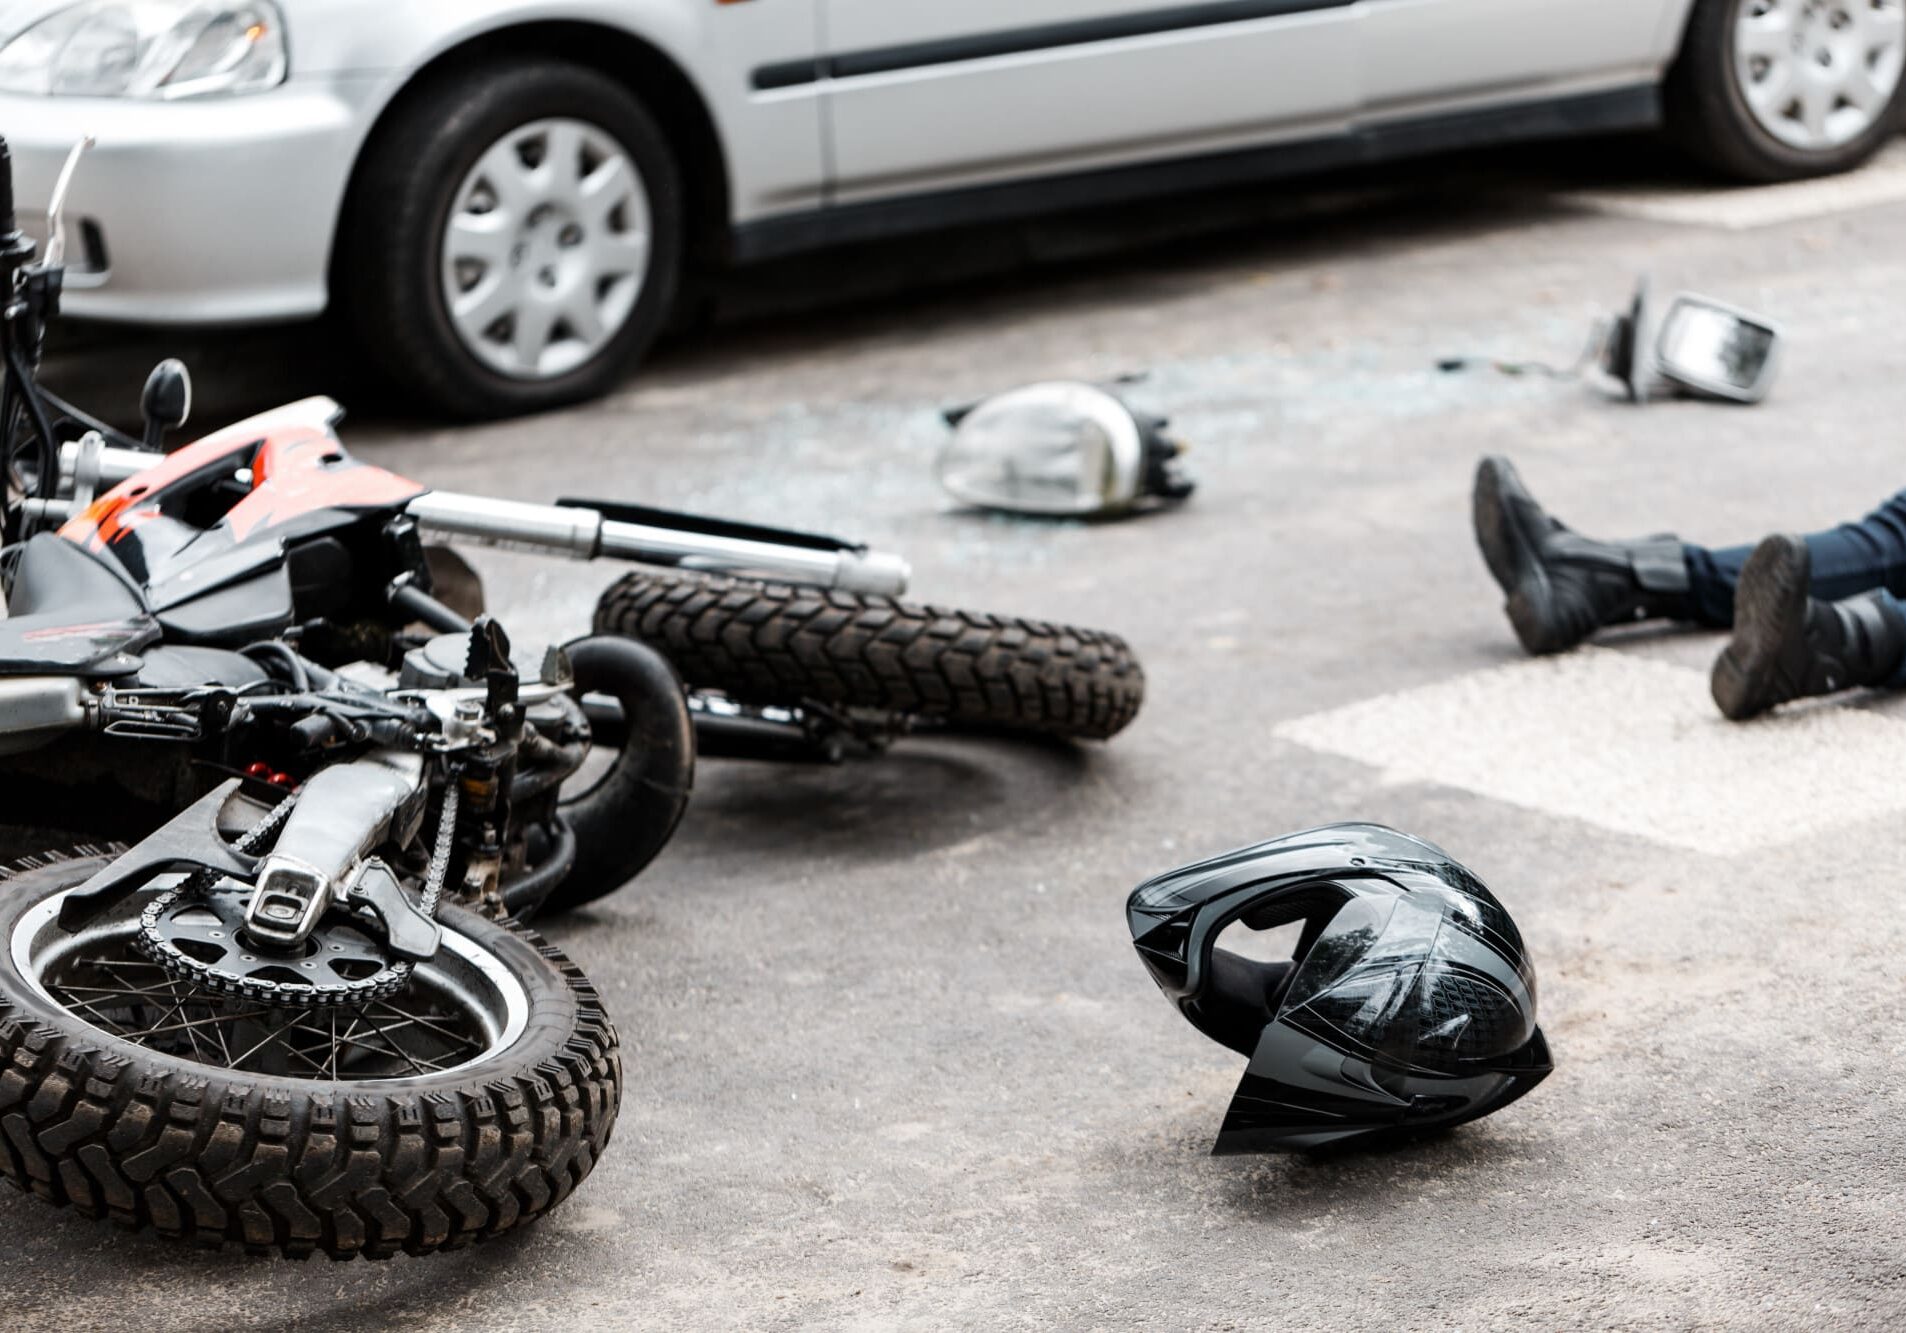 Motorcycle accident lawyer needed after wreck